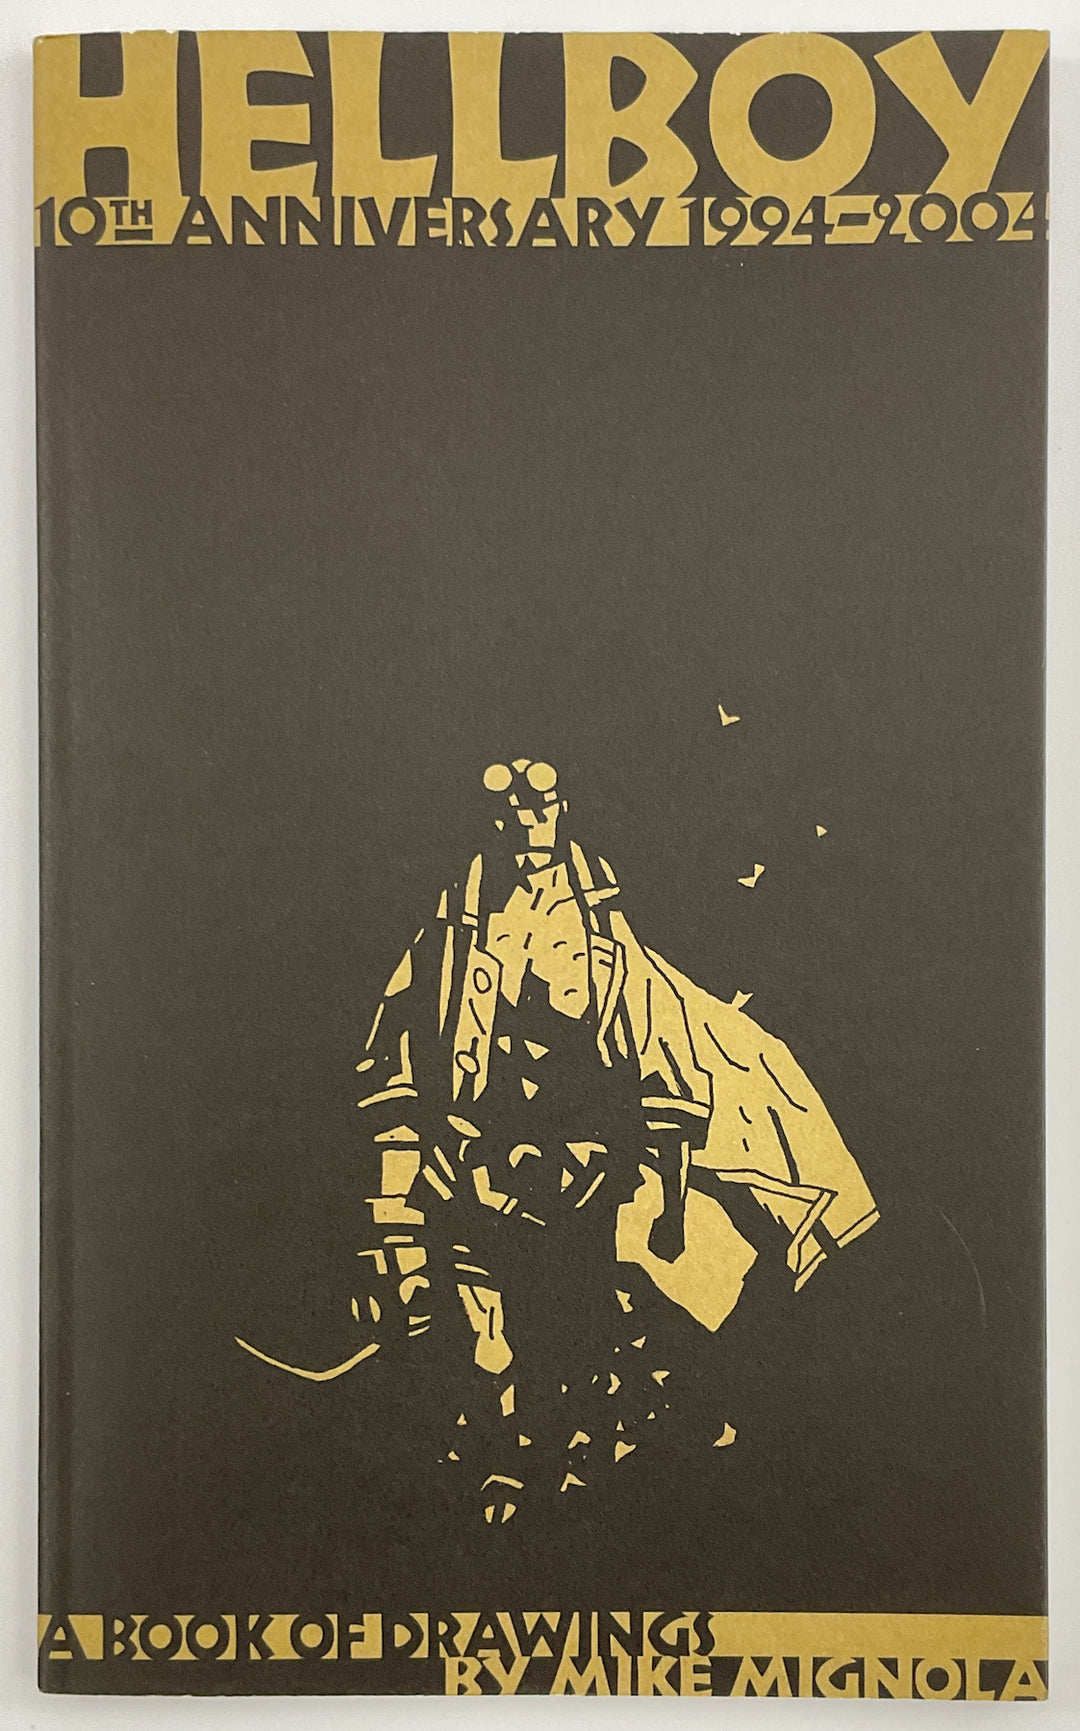 Hellboy 10th Anniversary 1994-2004: A Book of Drawings by Mike Mignola - Signed & Numbered